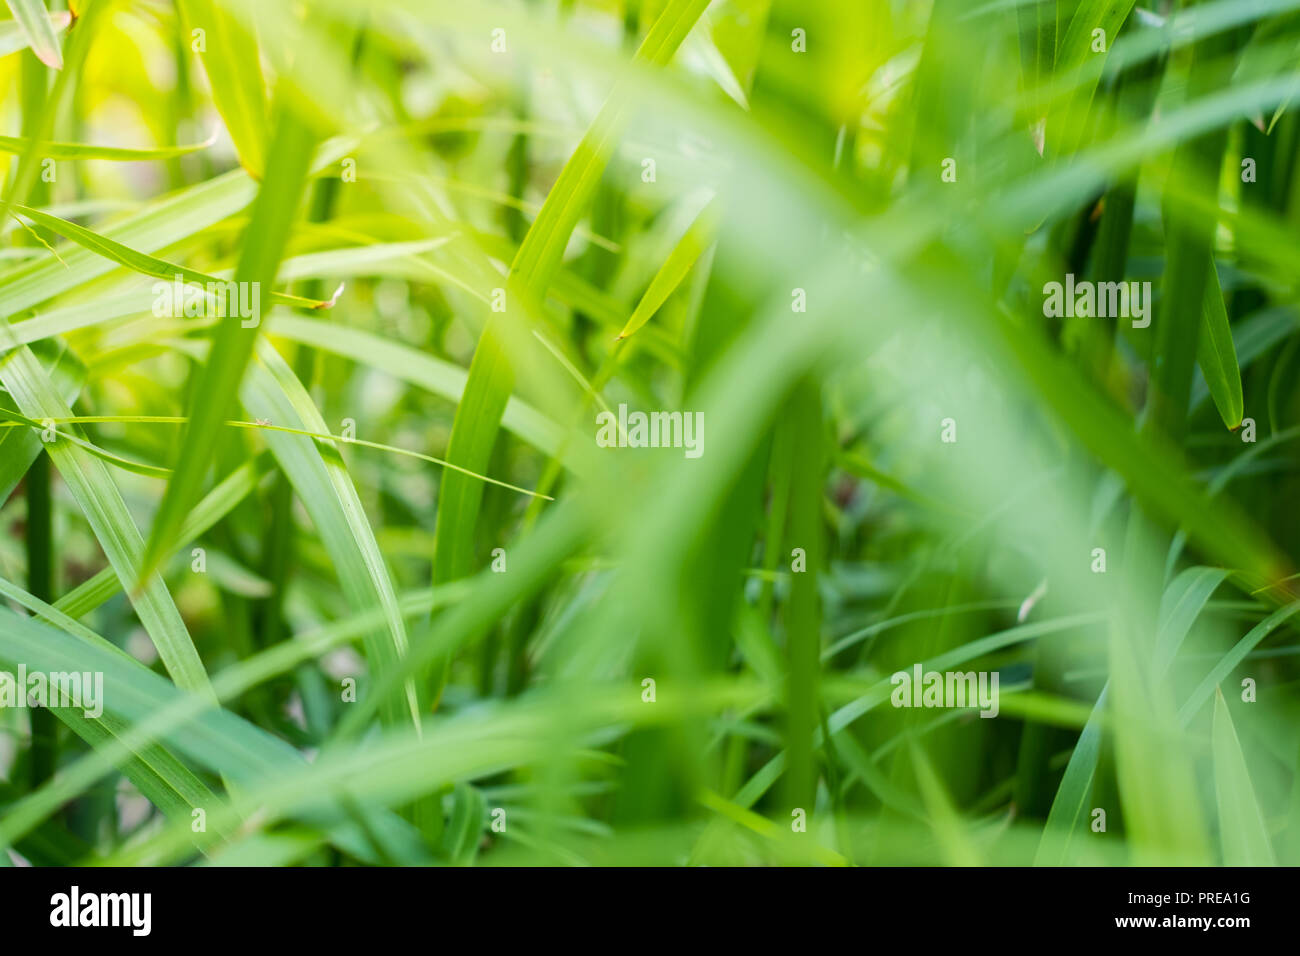 sunlight in plant leaves - garden concept background Stock Photo